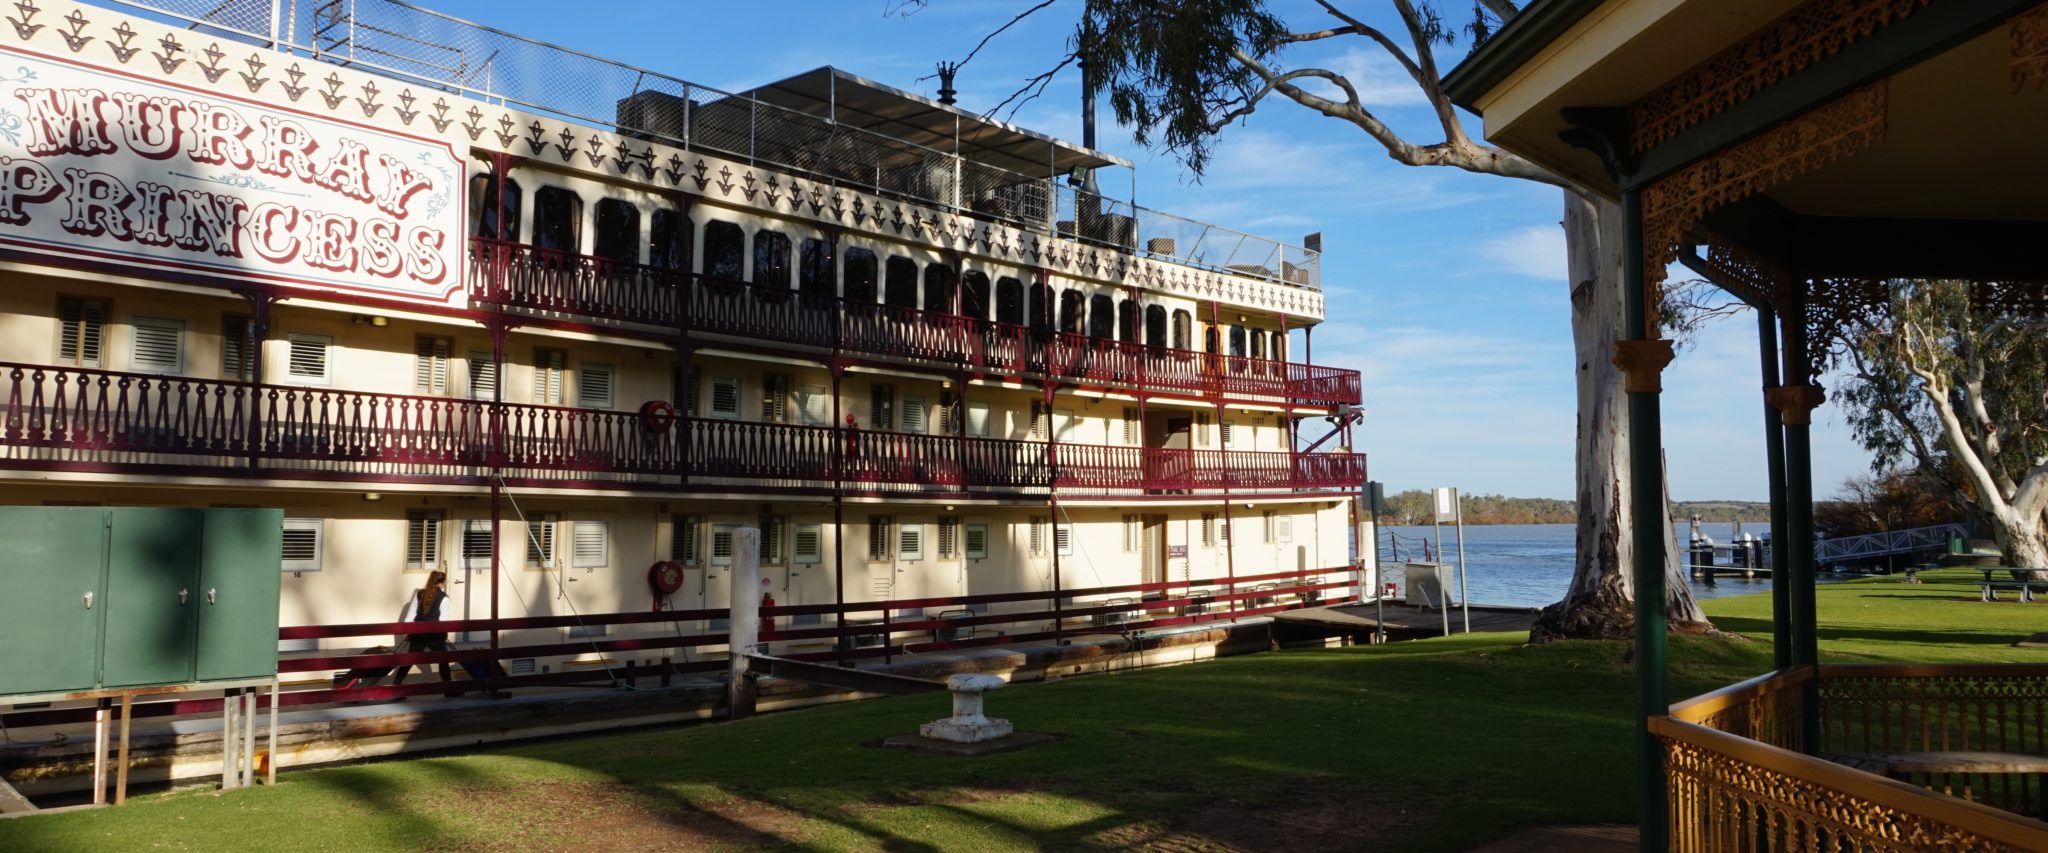 The PS Murray Princess on the banks of the Murray River.